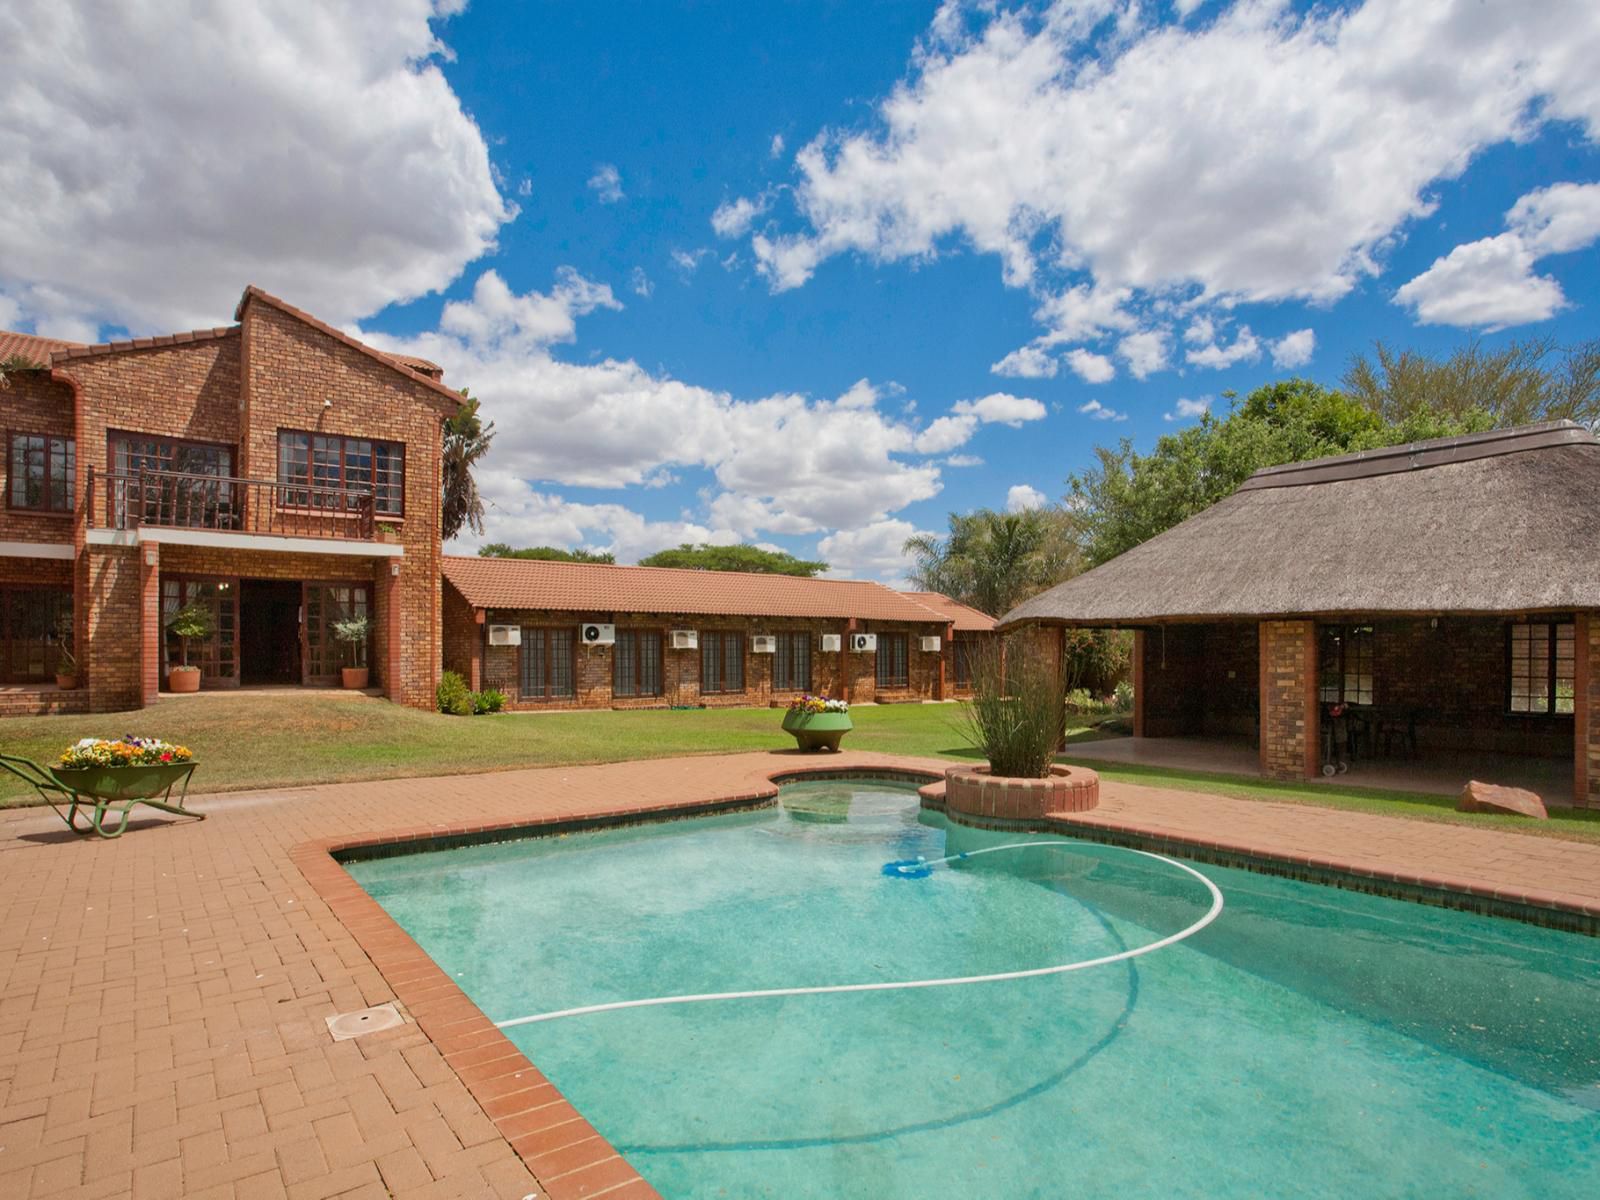 Peter S Guesthouse Equestria Pretoria Tshwane Gauteng South Africa Complementary Colors, House, Building, Architecture, Swimming Pool